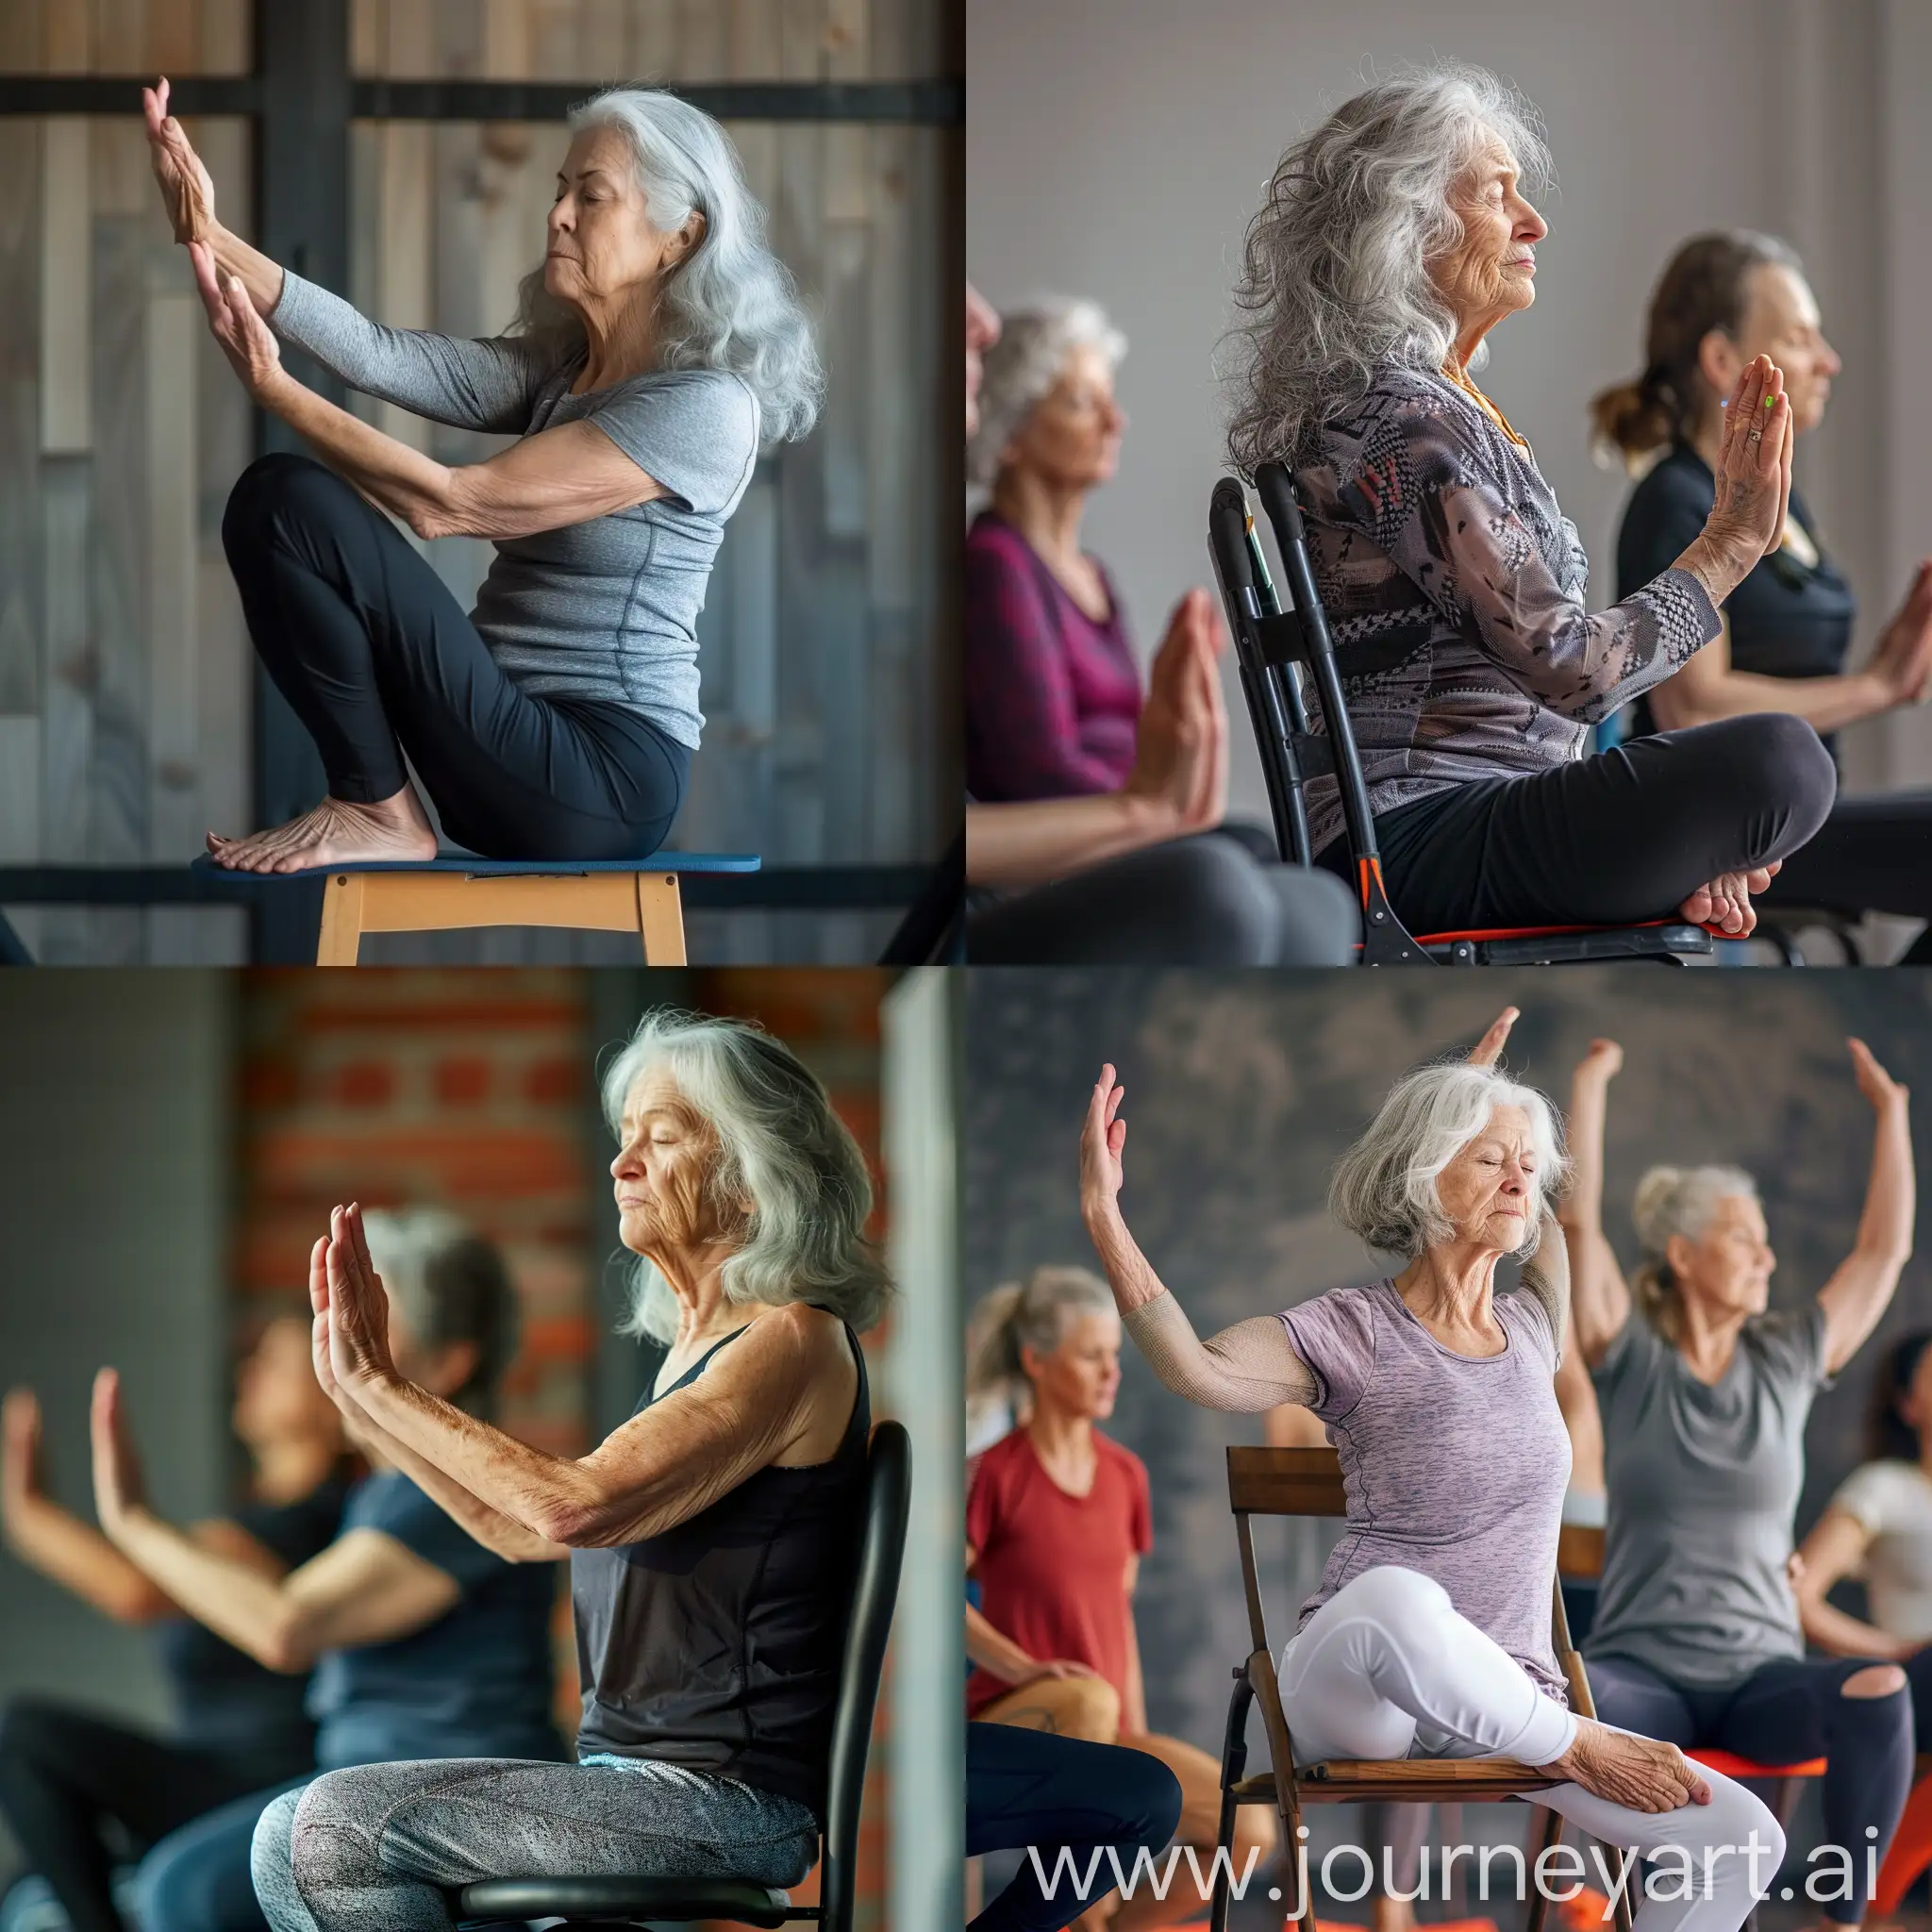 old woman with grey hair is doing yoga on the chair in the yoga class